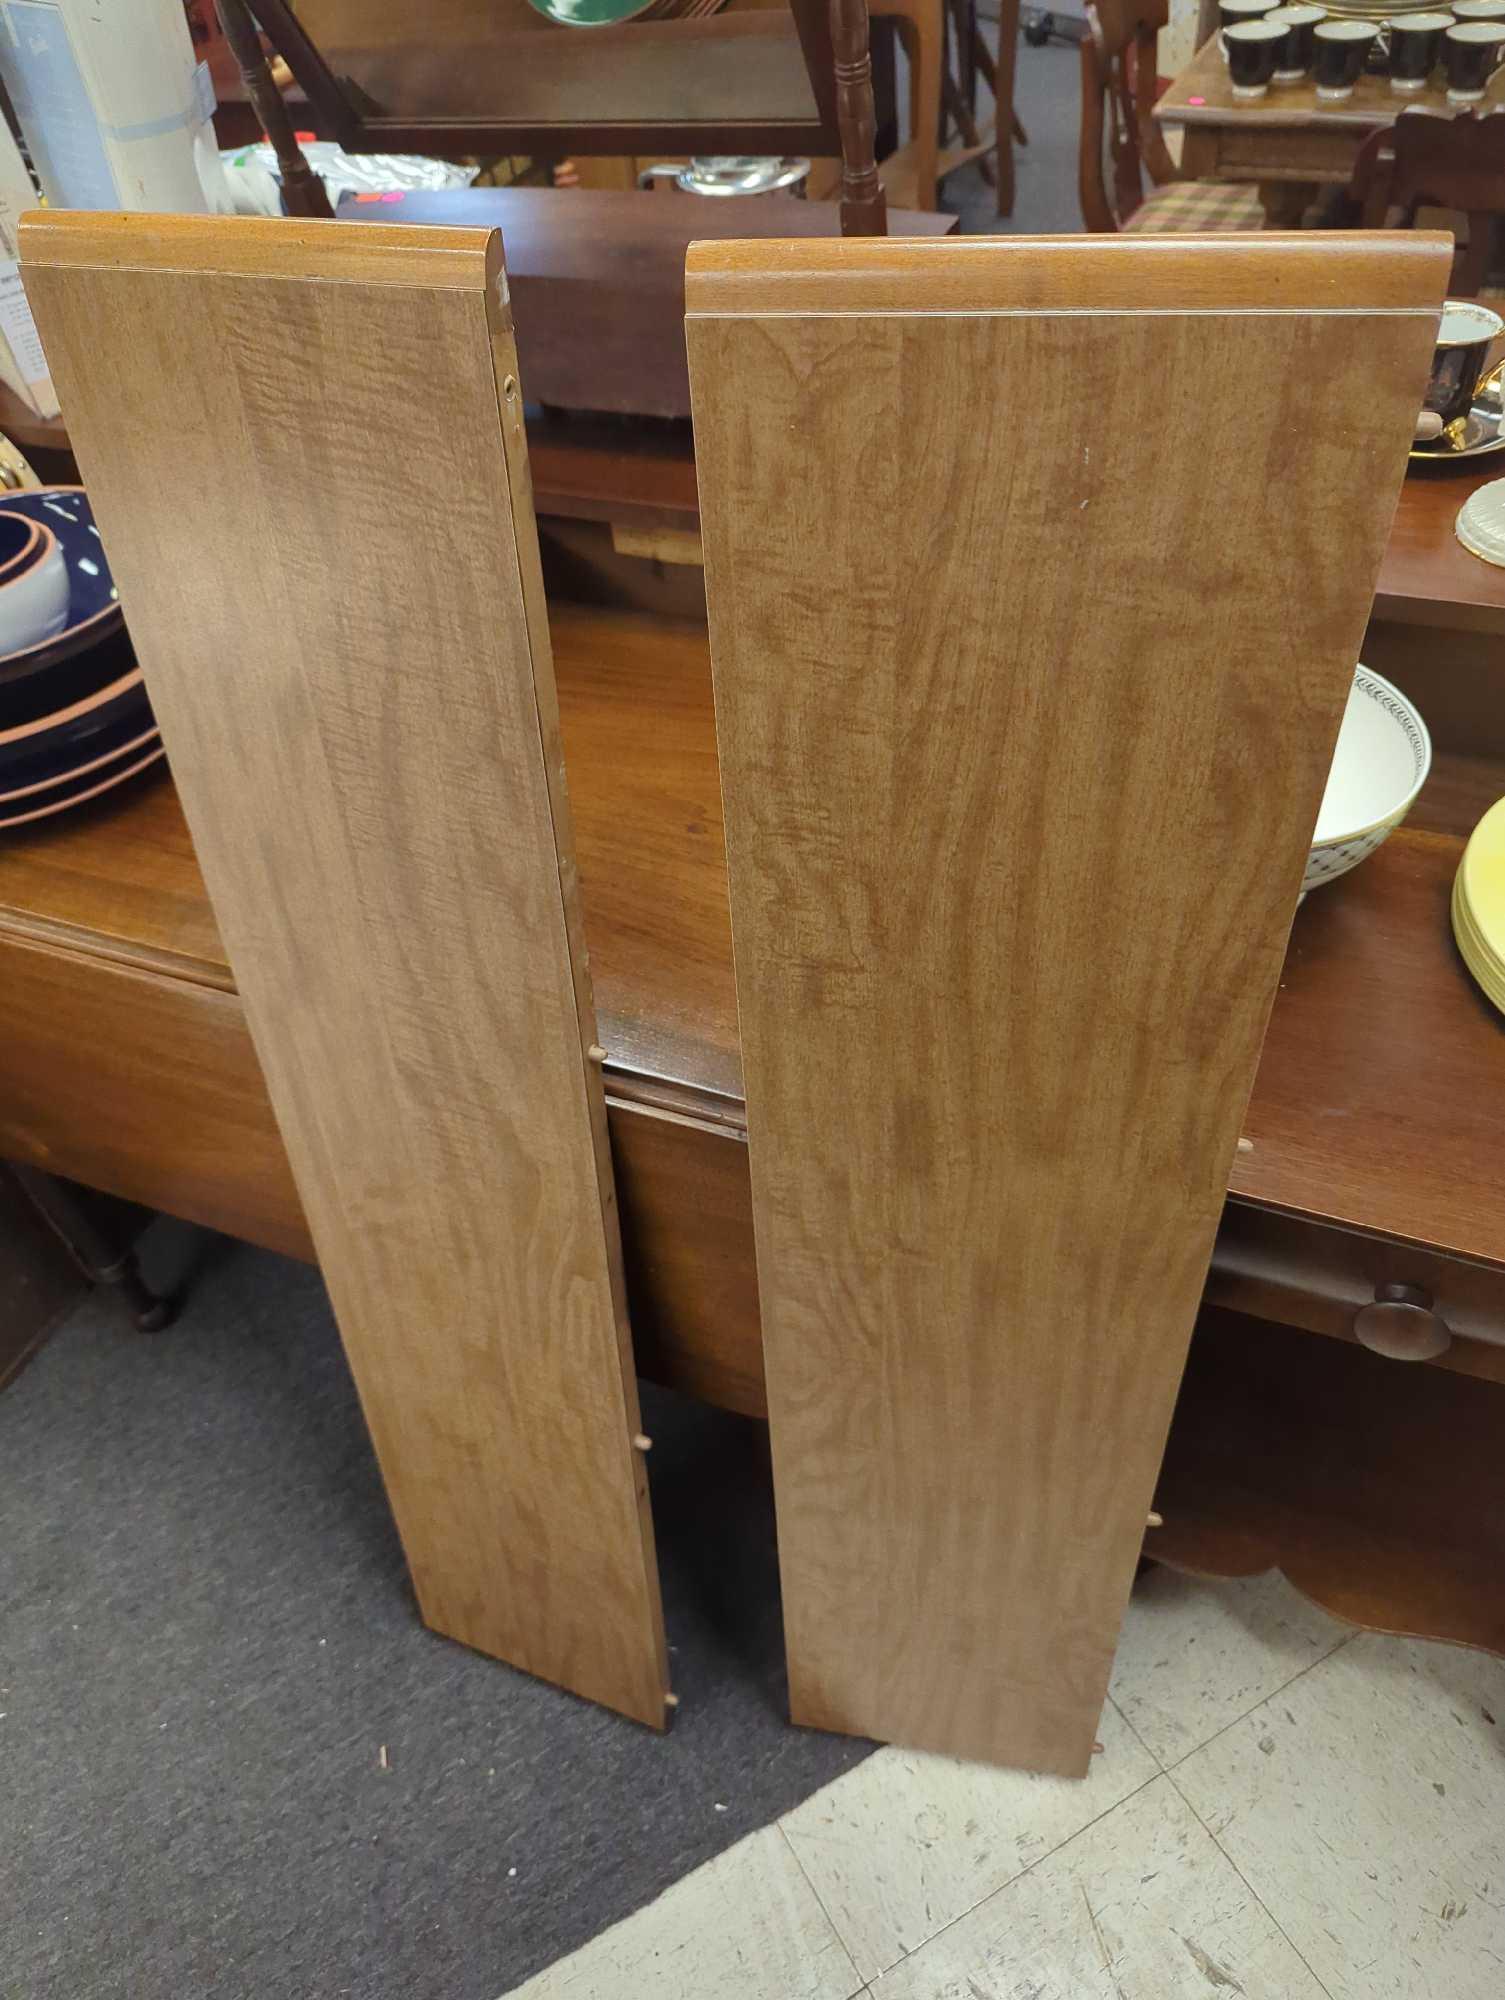 Mid Century Oak Extendable Drop Leaf Dining Table with 2 Center Leaf Inserts, Approximate Dimensions